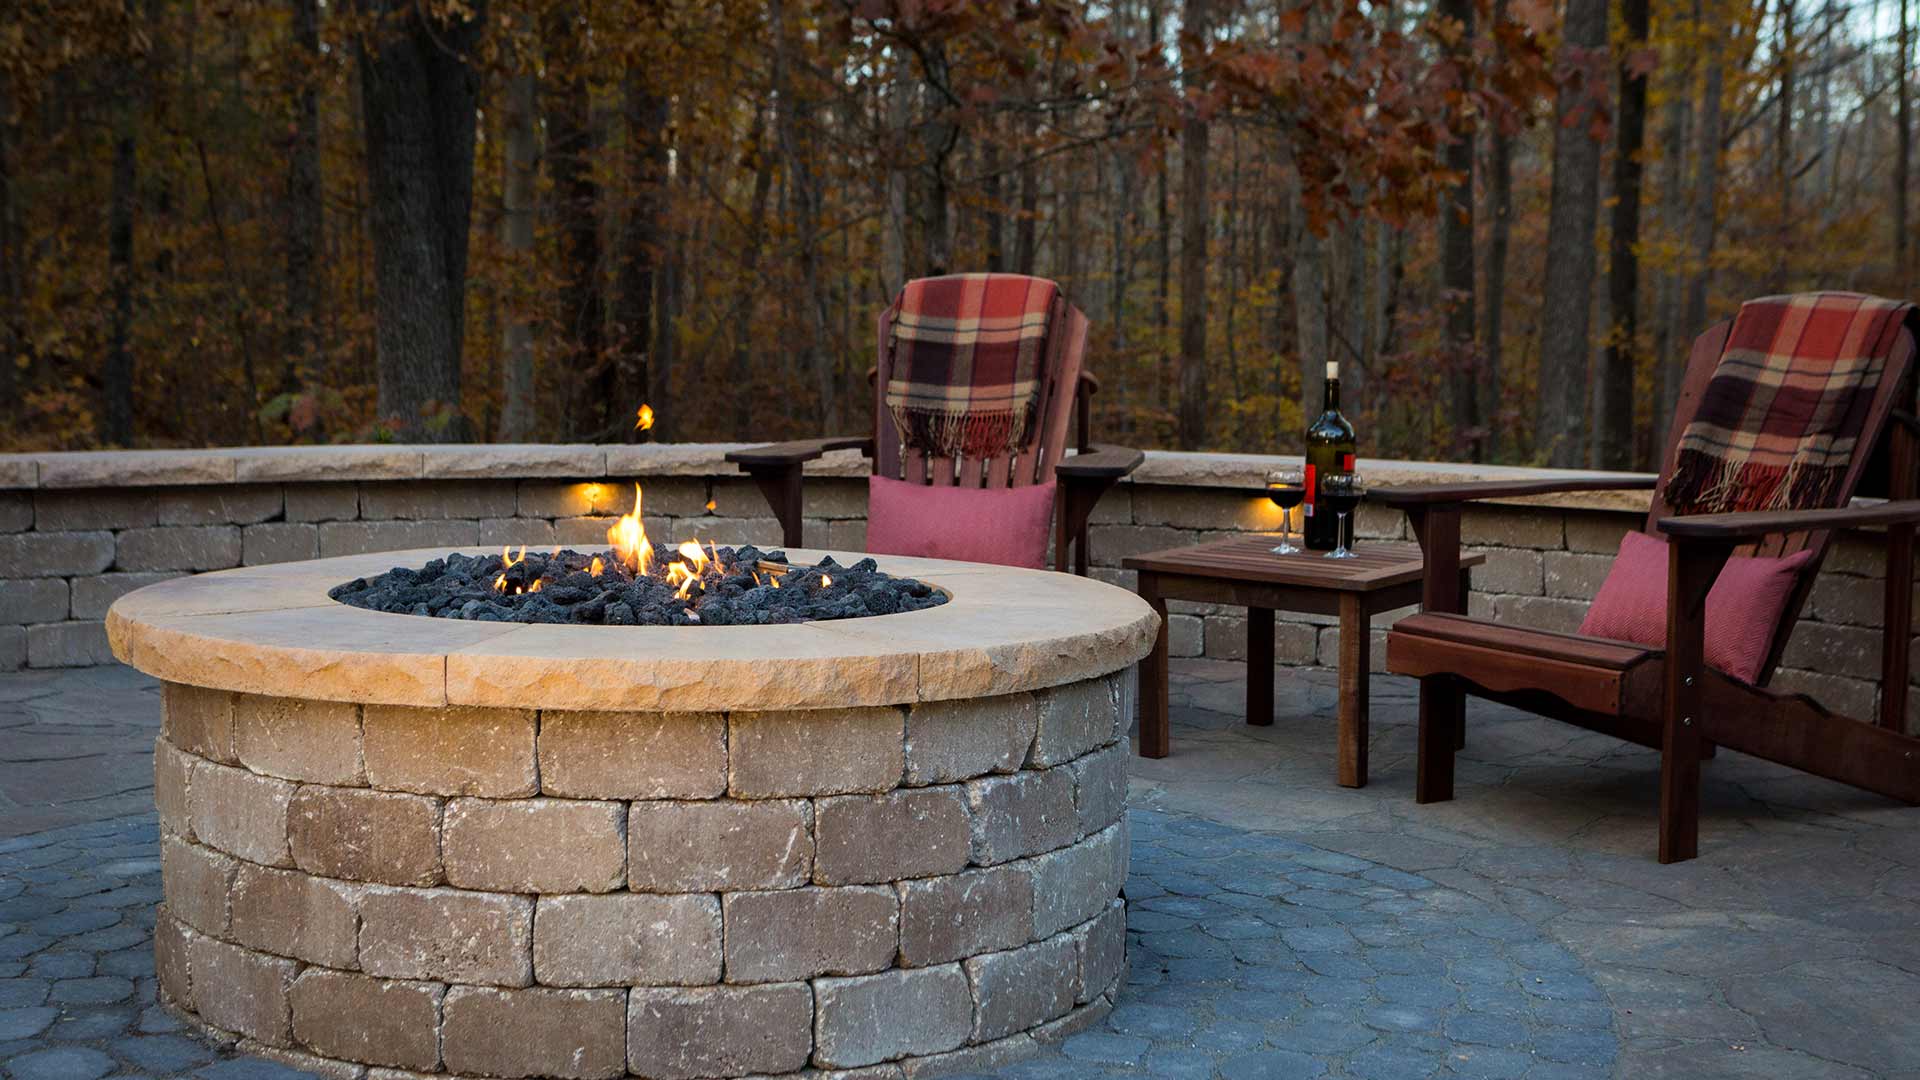 Custom fire pit and paver patio with seating and wine on table near Greensboro, NC.